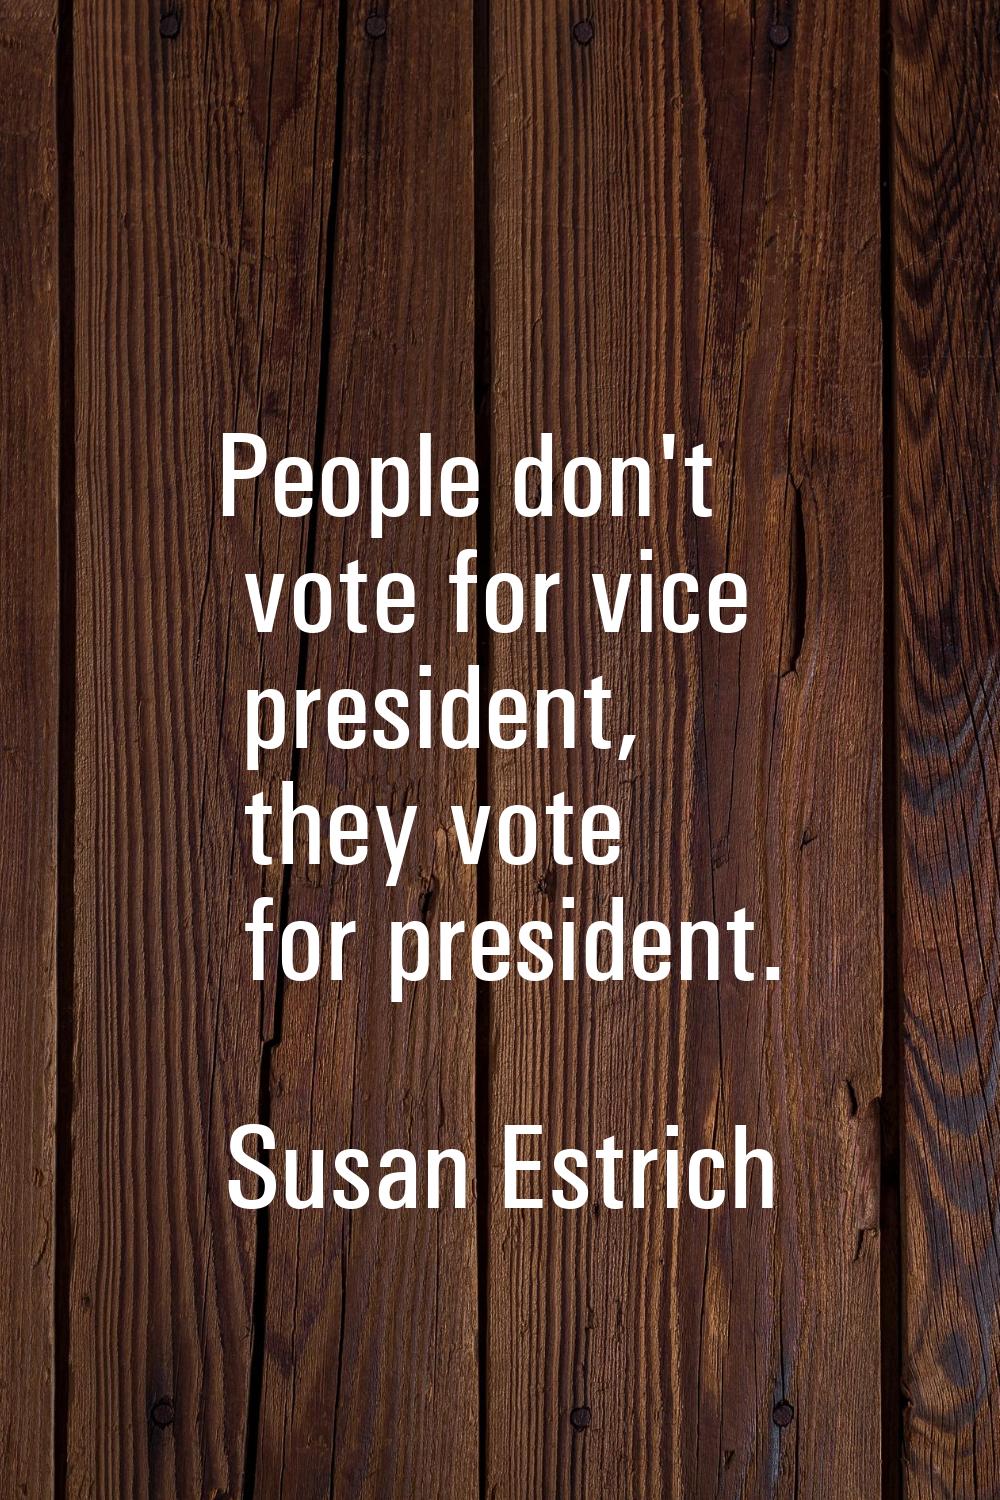 People don't vote for vice president, they vote for president.